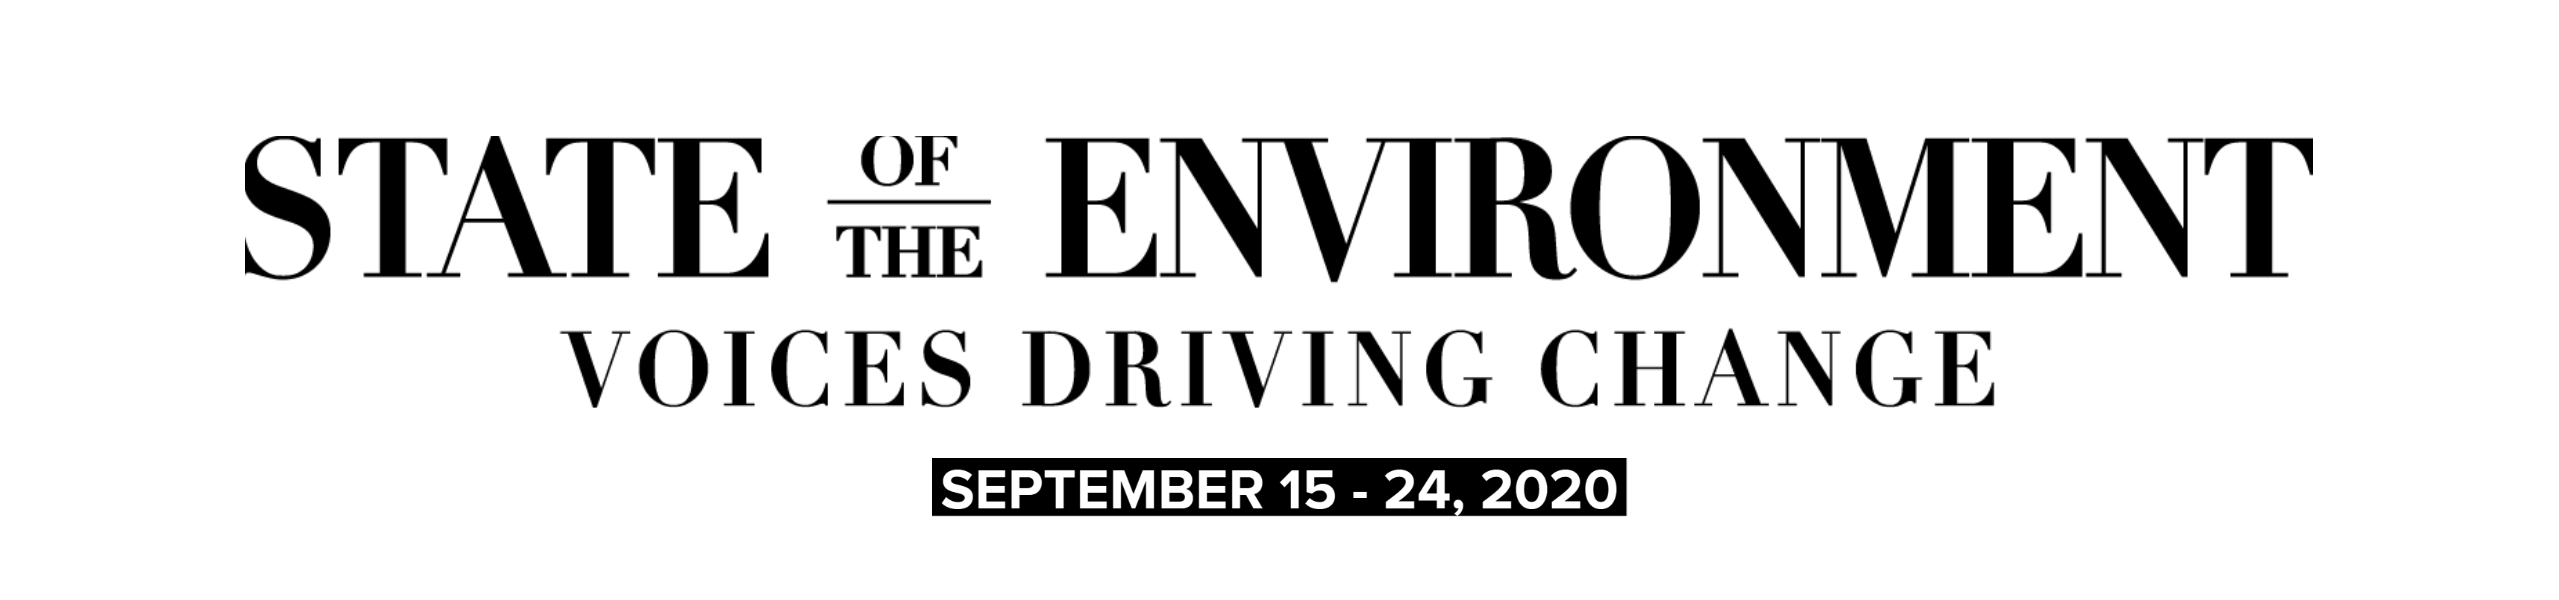 State of the Environment Voices Driving Change September 15 - 24 2020